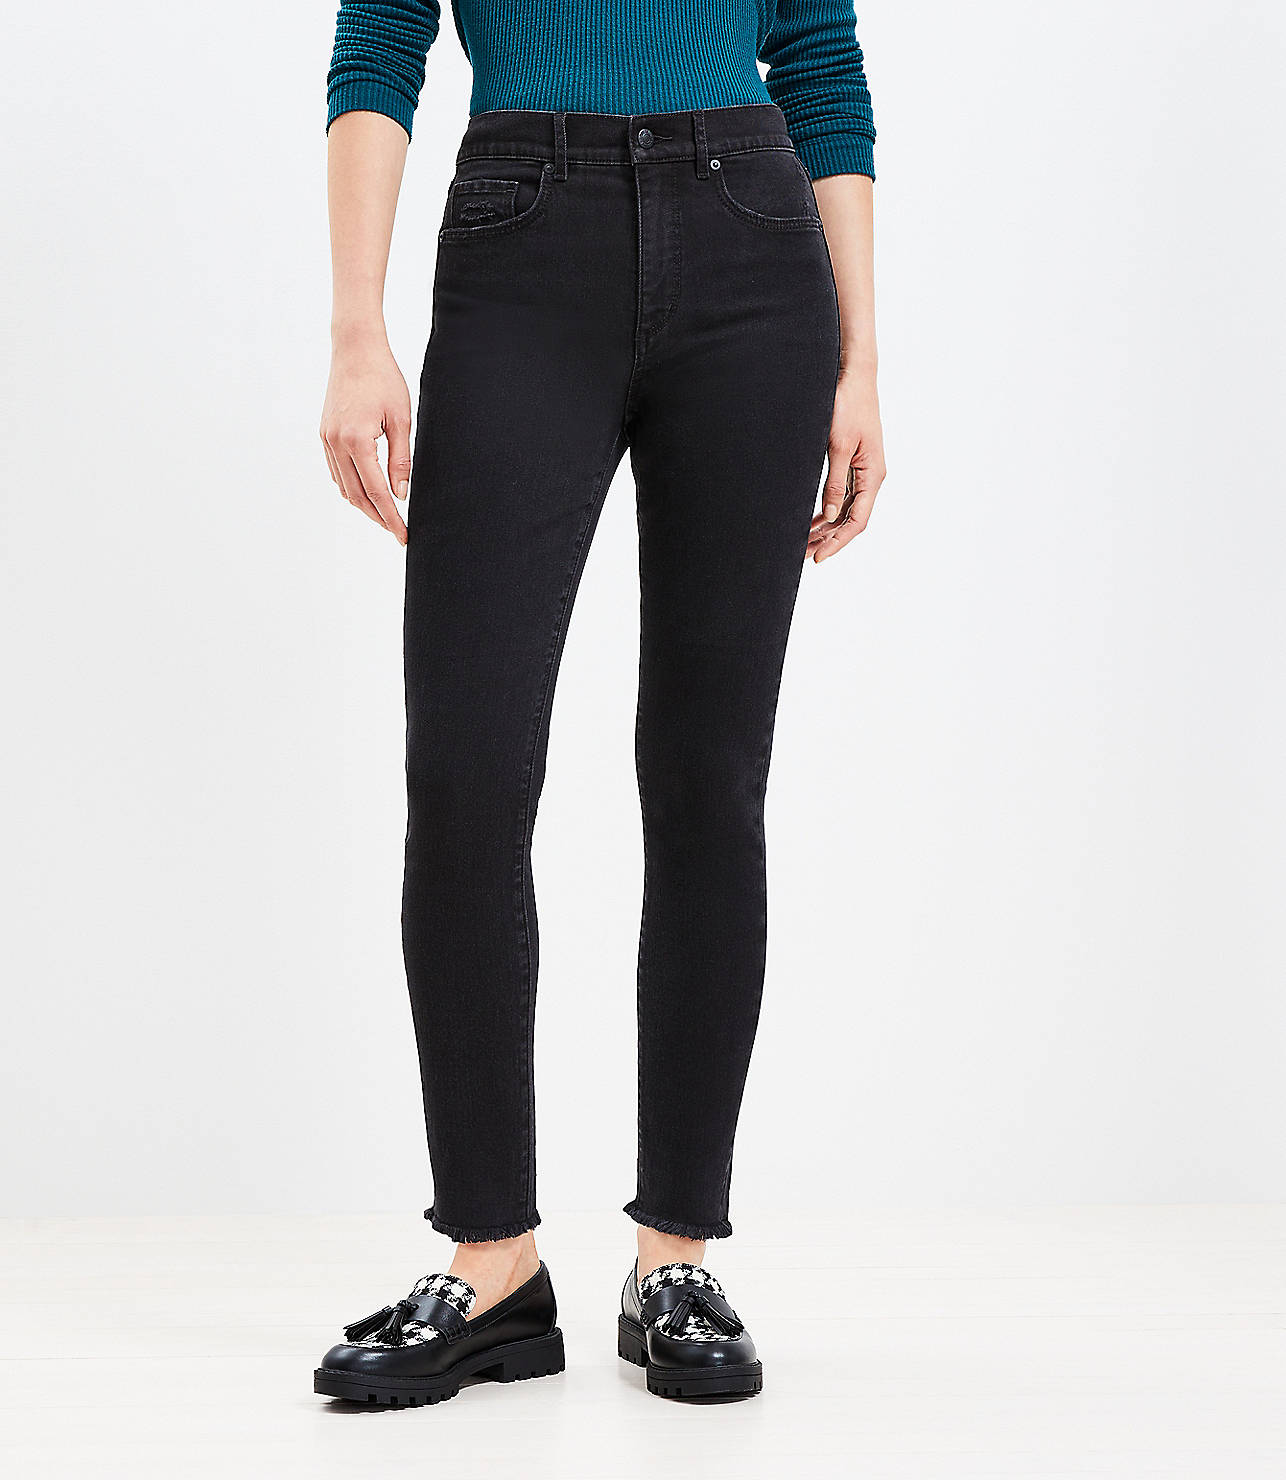 Curvy Frayed High Rise Skinny Jeans in Washed Black Wash